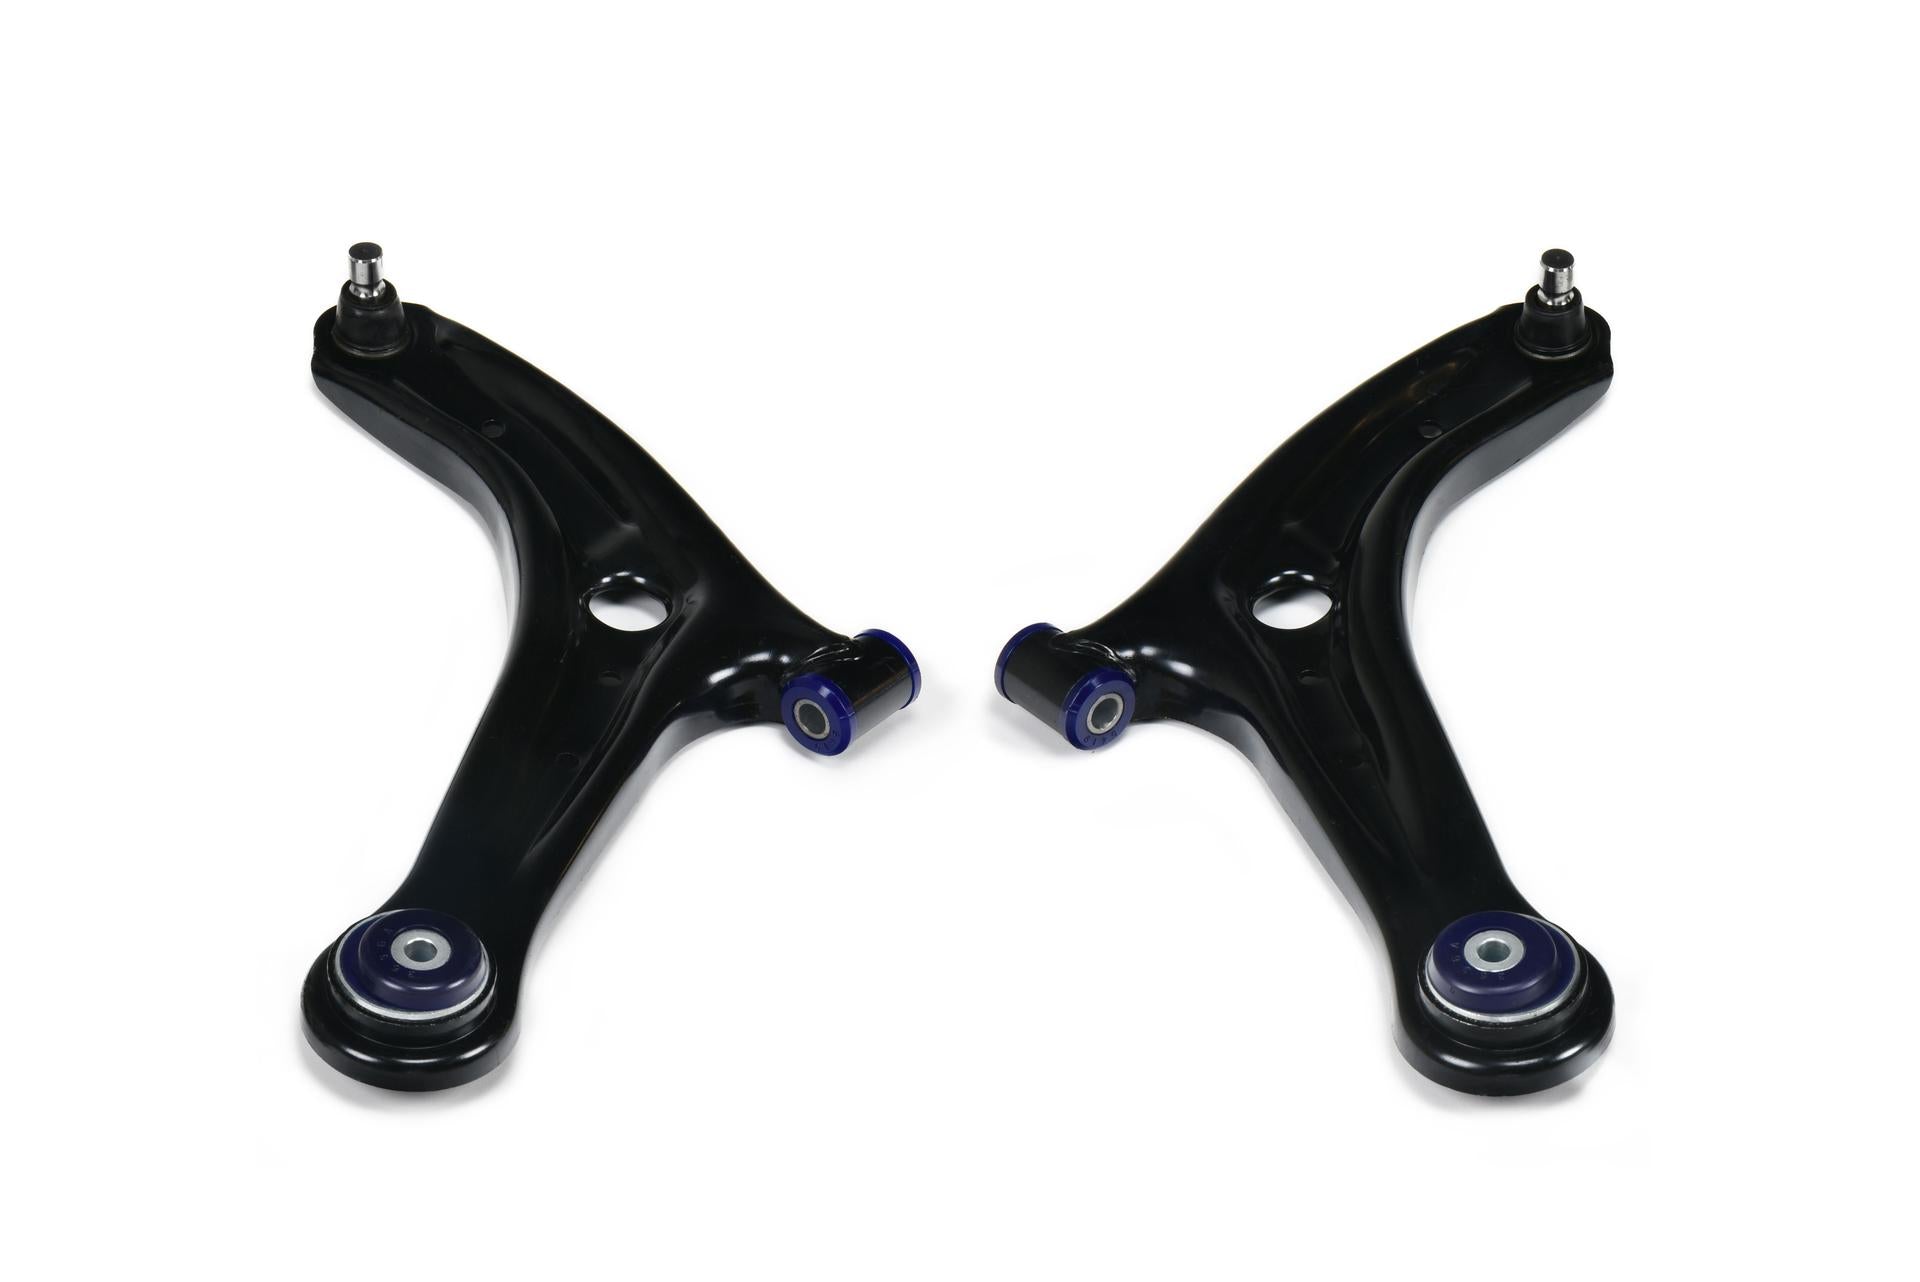 Control Arm Lower Assembly Kit Fiesta mk7 Caster Increase